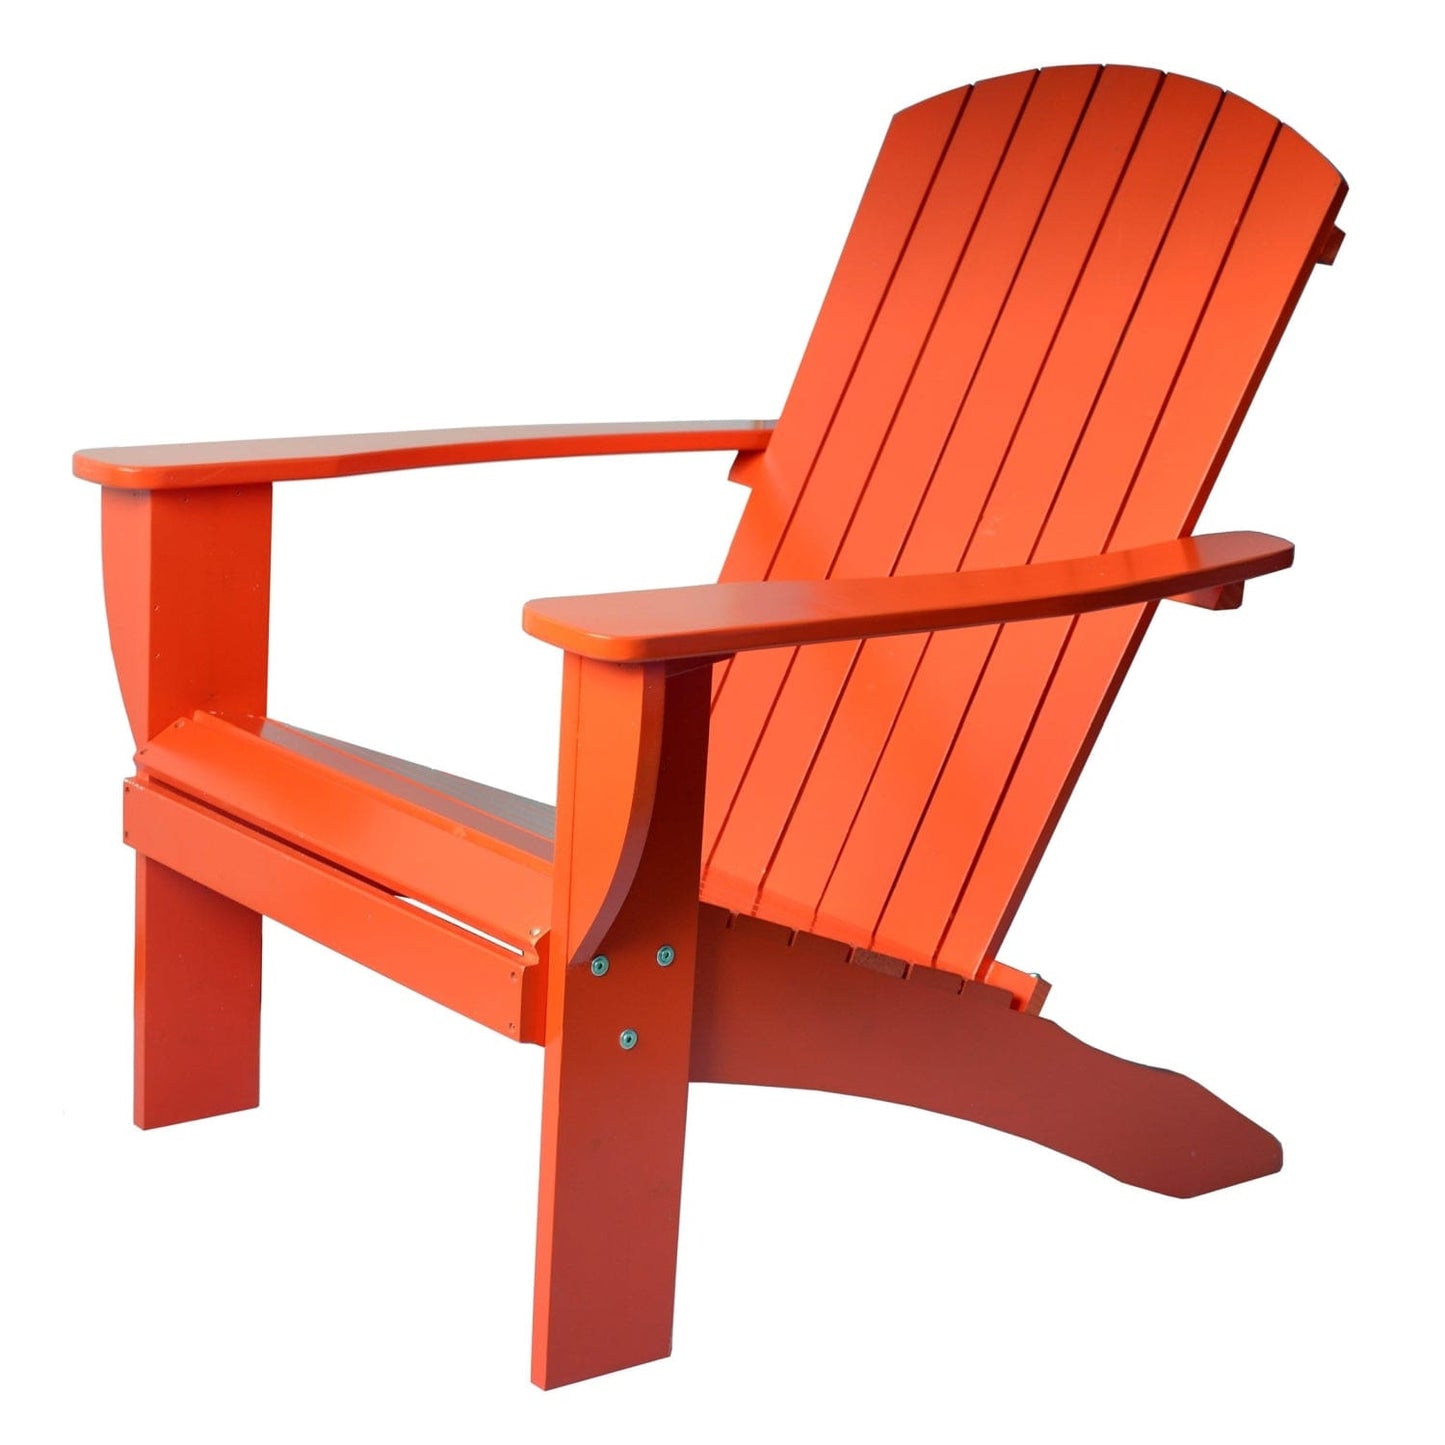 Riverstone Industries Outdoor Chairs Riverstone | Adirondack Chair with Side Table - Orange RSI-AC-OR-T